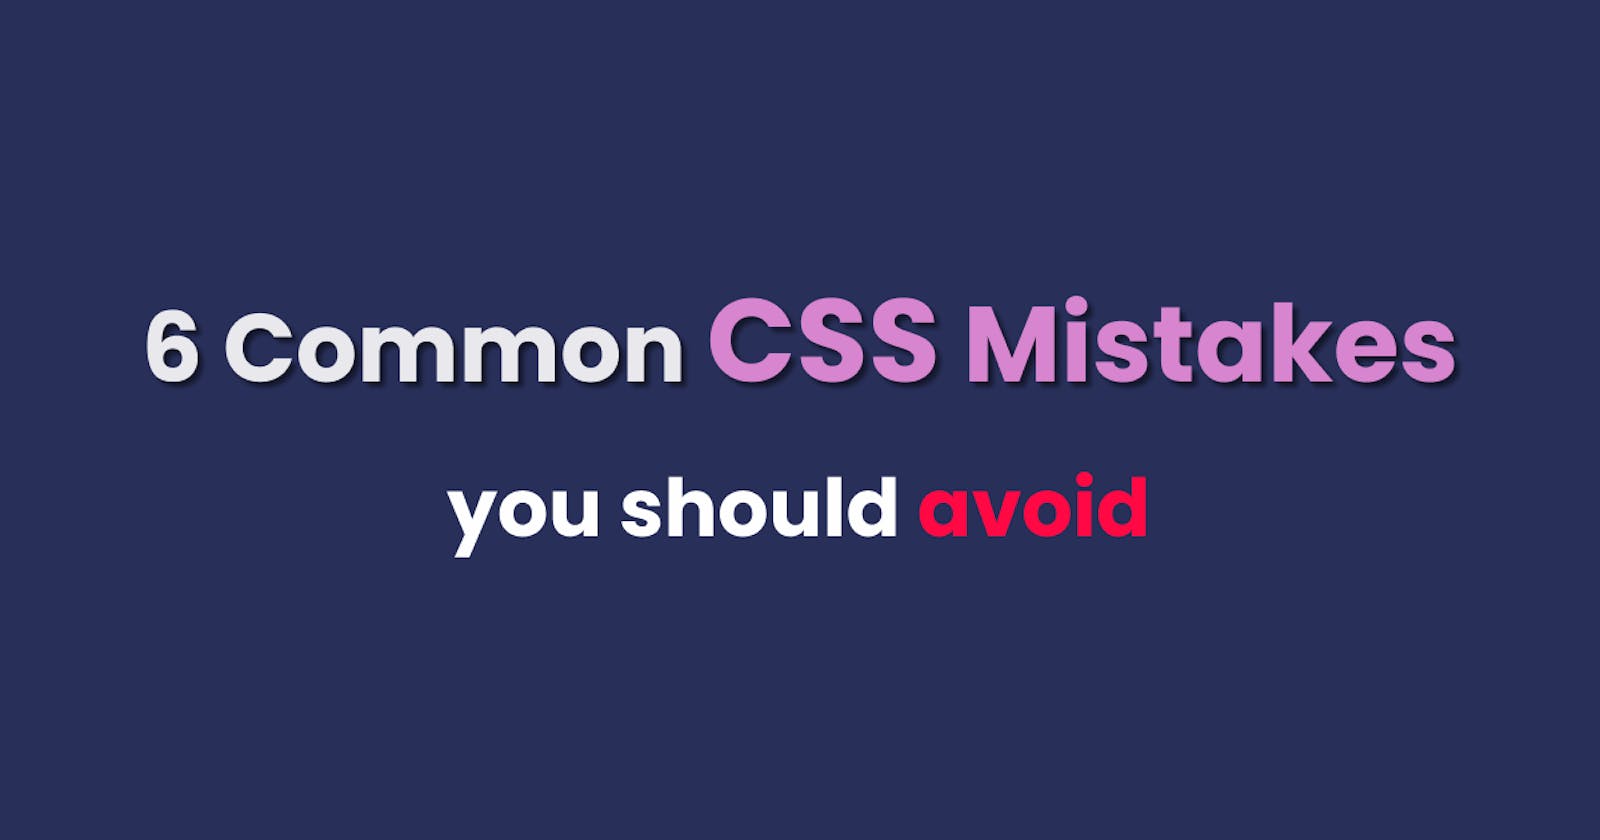 6 Common CSS Mistakes You Should Avoid